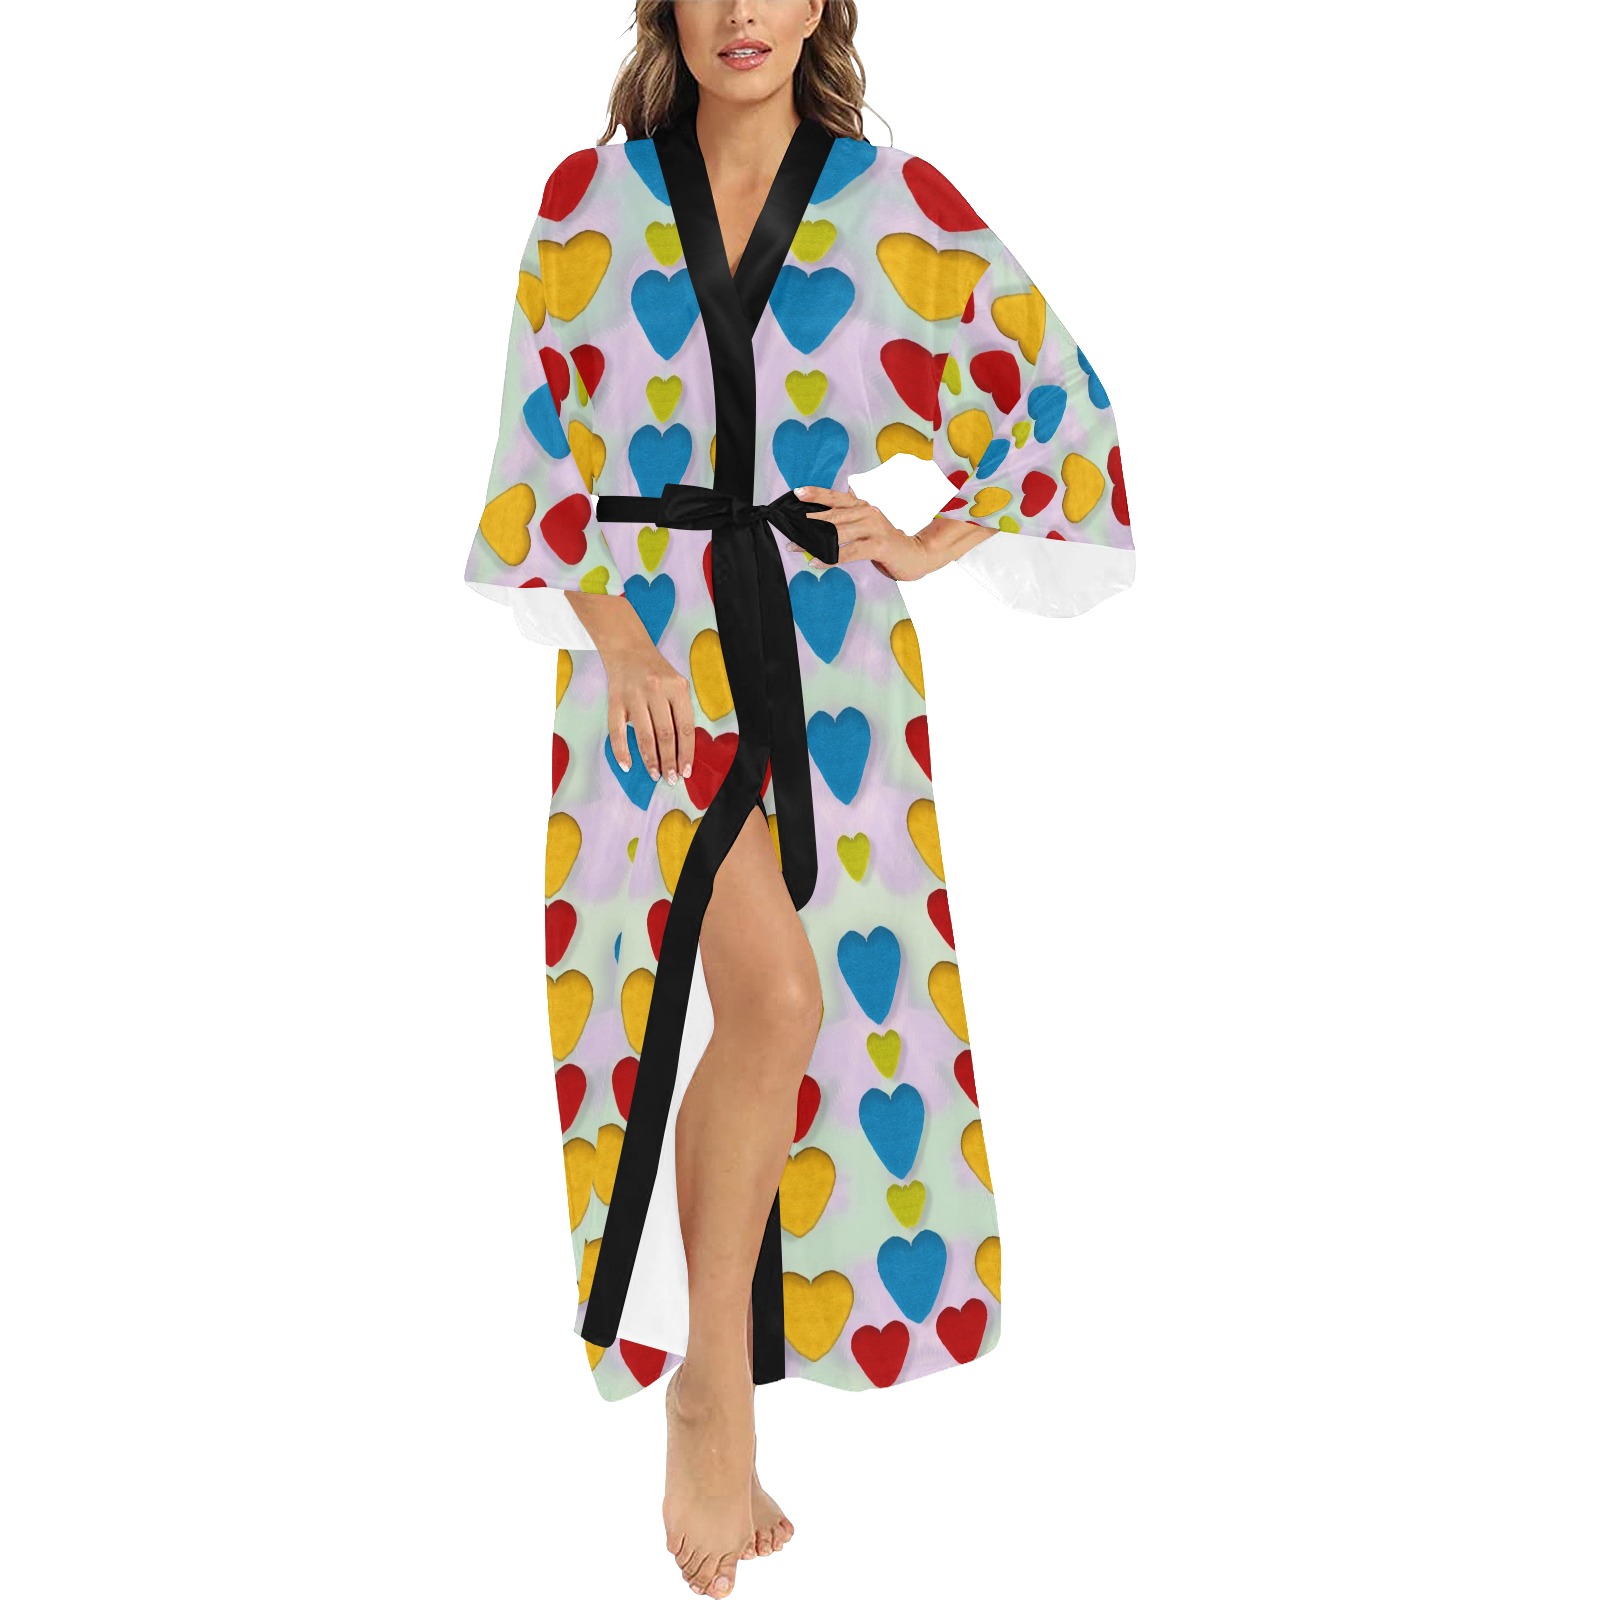 So sweet and hearty as love can be Long Kimono Robe